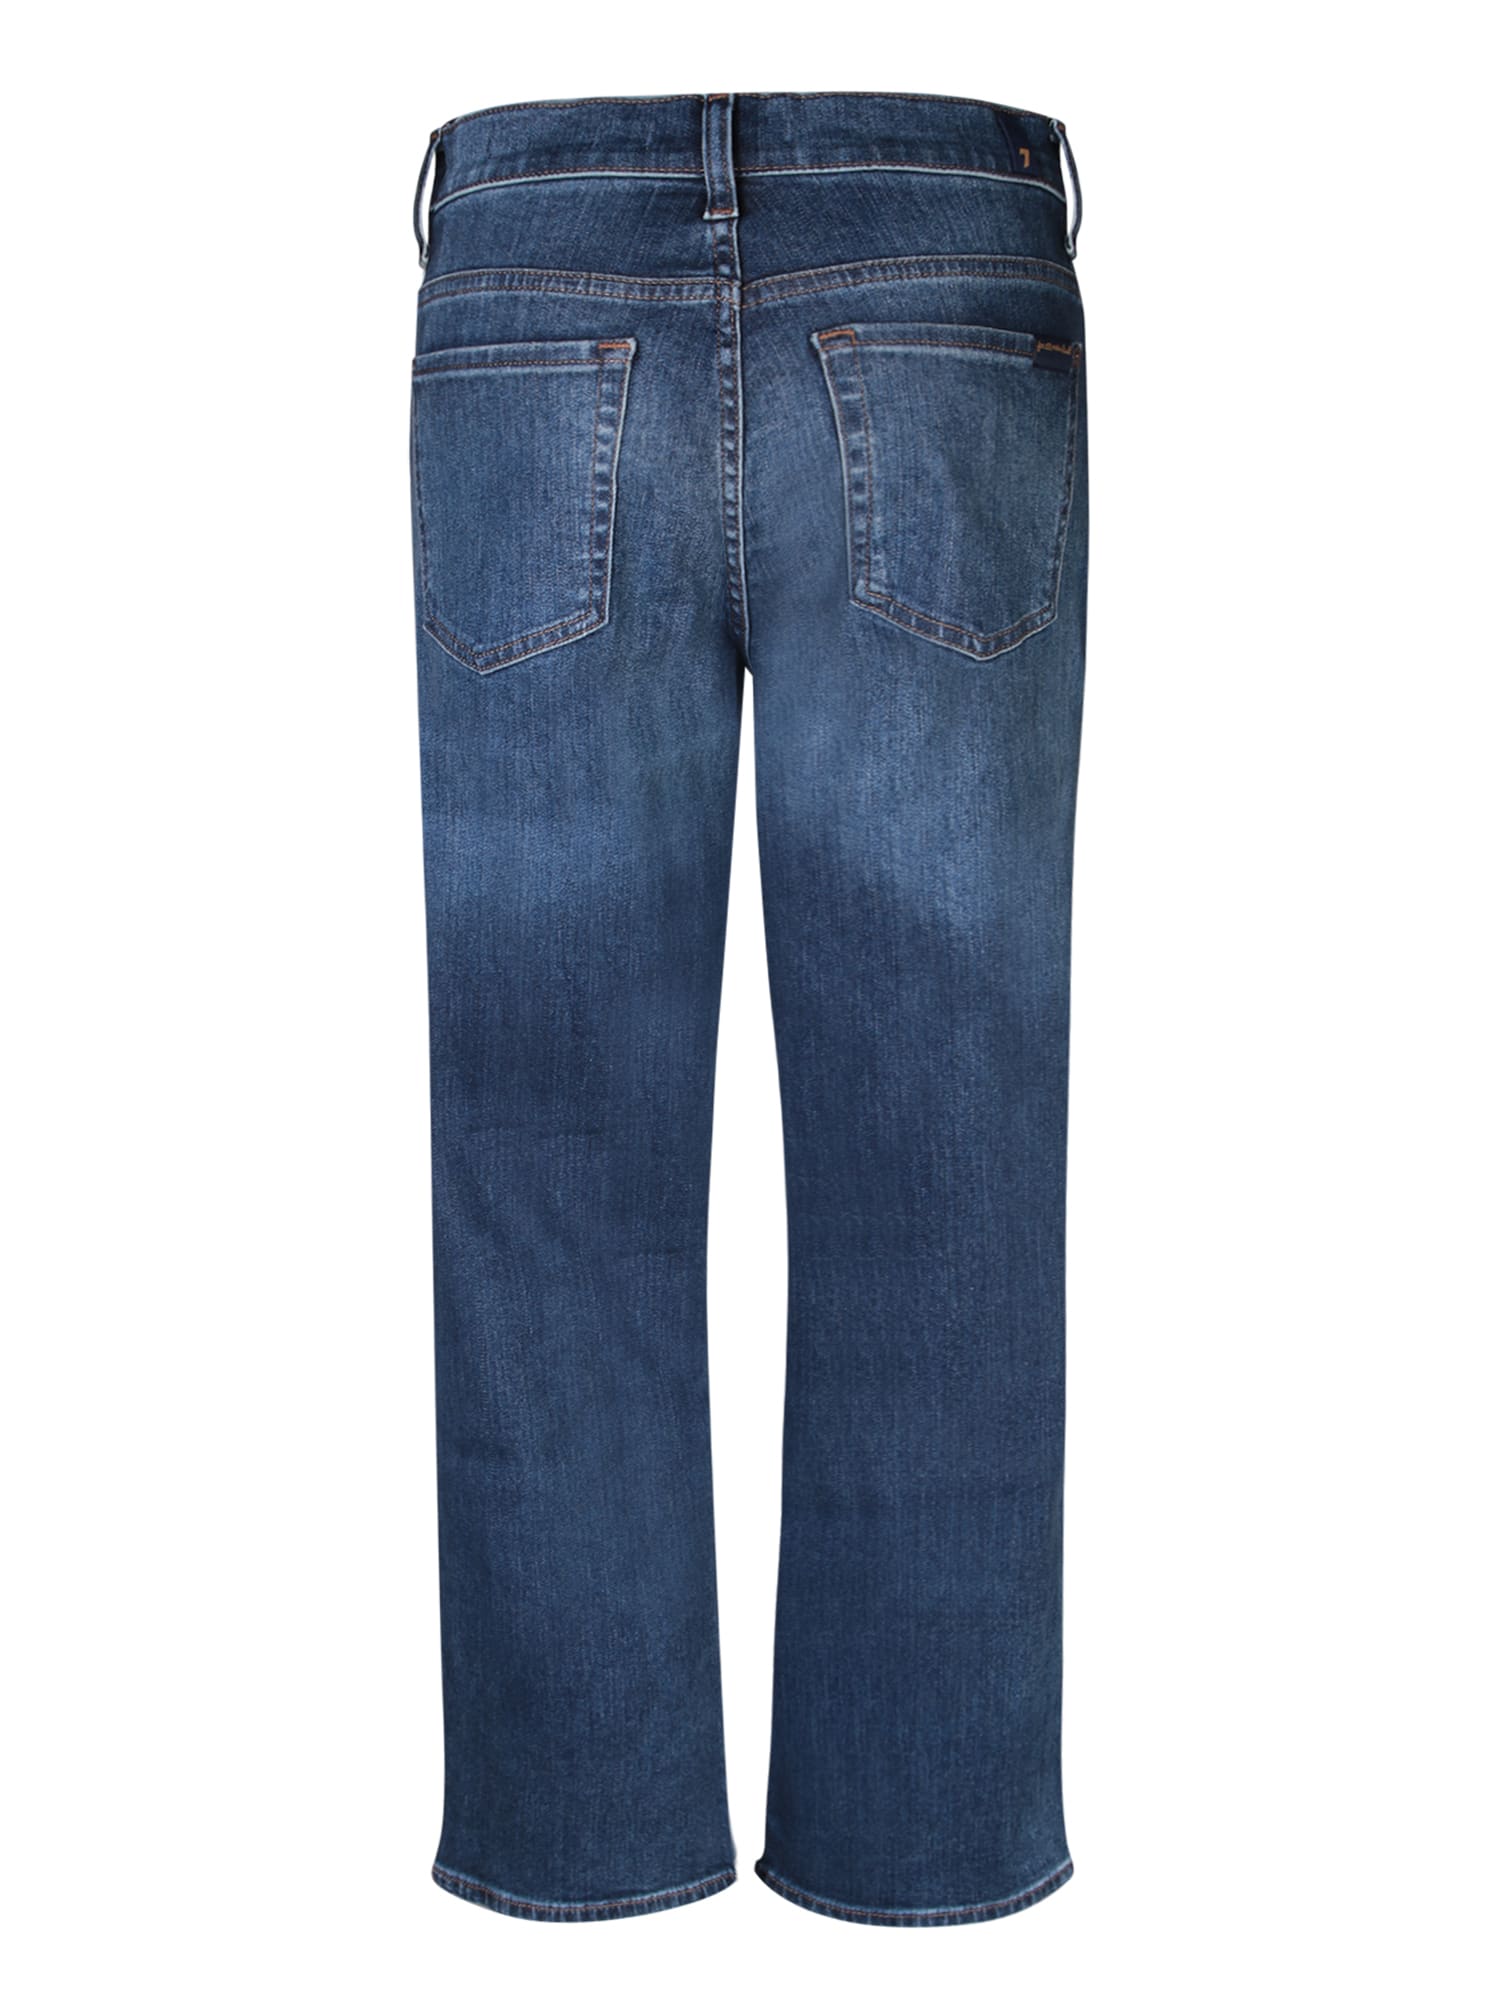 Shop 7 For All Mankind The Modern Straight Blue Jeans